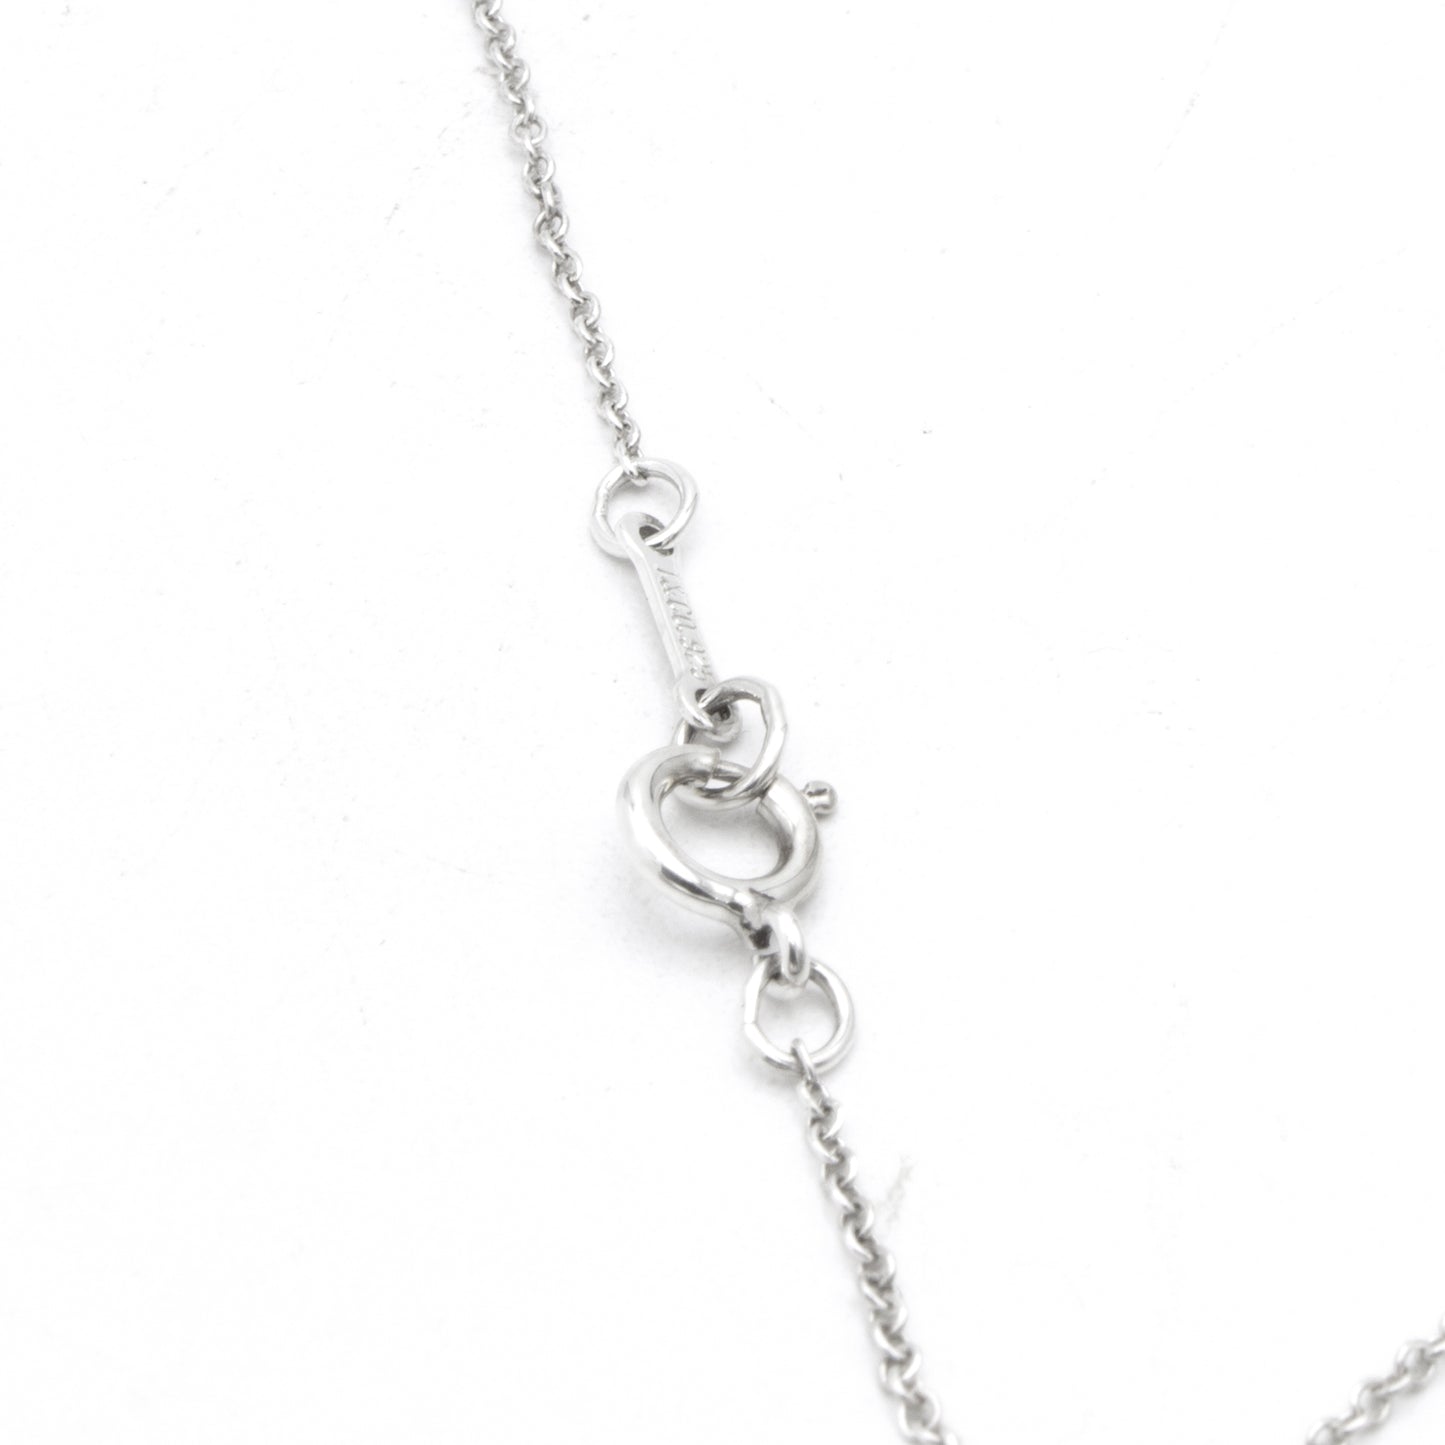 Tiffany & Co Scribble necklace